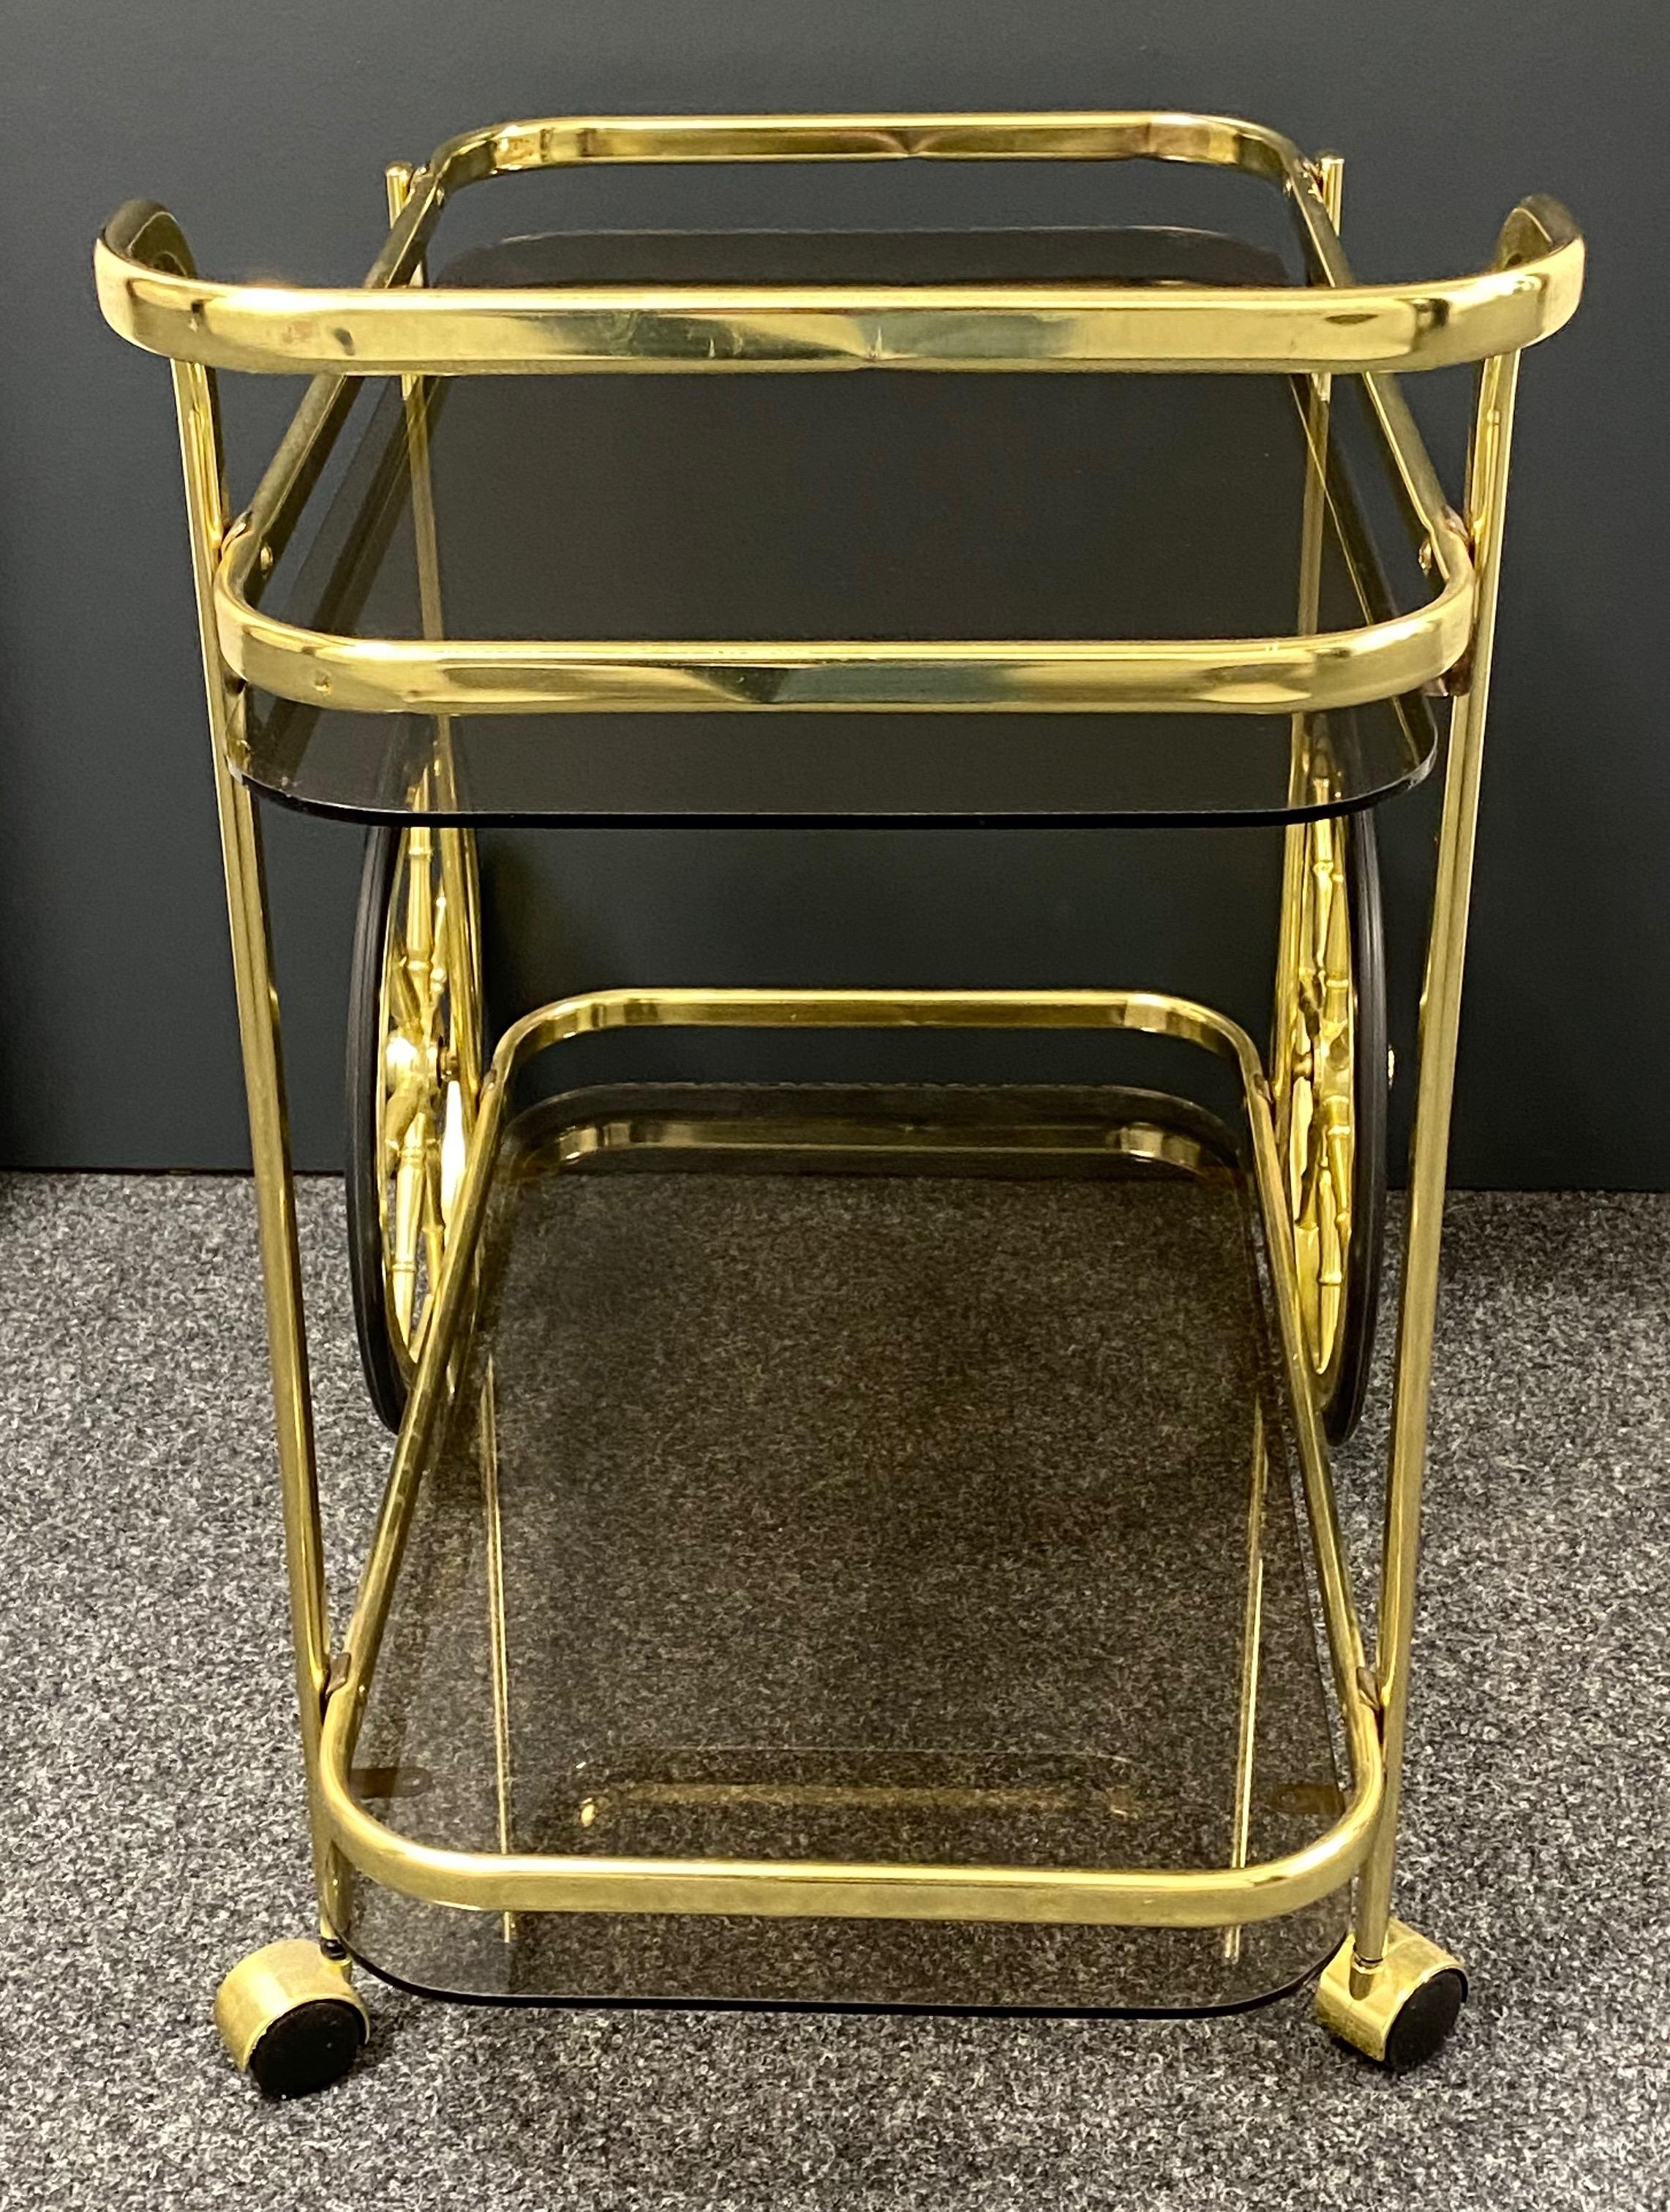 Metal Hollywood Regency Style Bar Cart, Tea Trolley or Drinks Stand in Brass and Glass